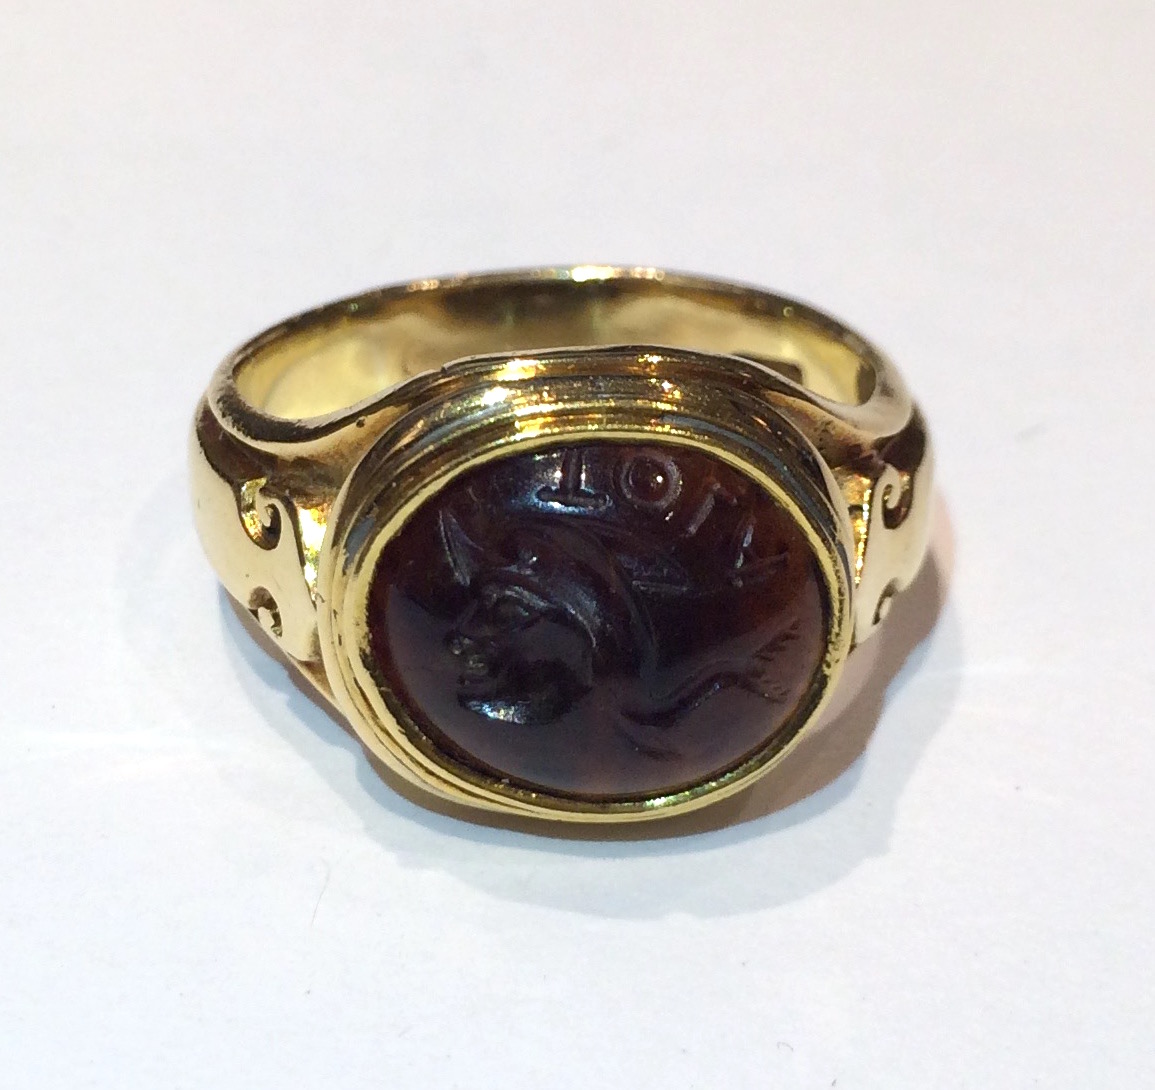 Charles Gordon (reg. London 1828) “Medieval Revival” signet ring, 18K gold with stylized arrow motifs on either side and bezel set with an ancient agate Intaglio carved with the head of a knight and Latin or Greek letters, signed: C.G. for Charles Gordon in a rectangular cartouche, c.1850